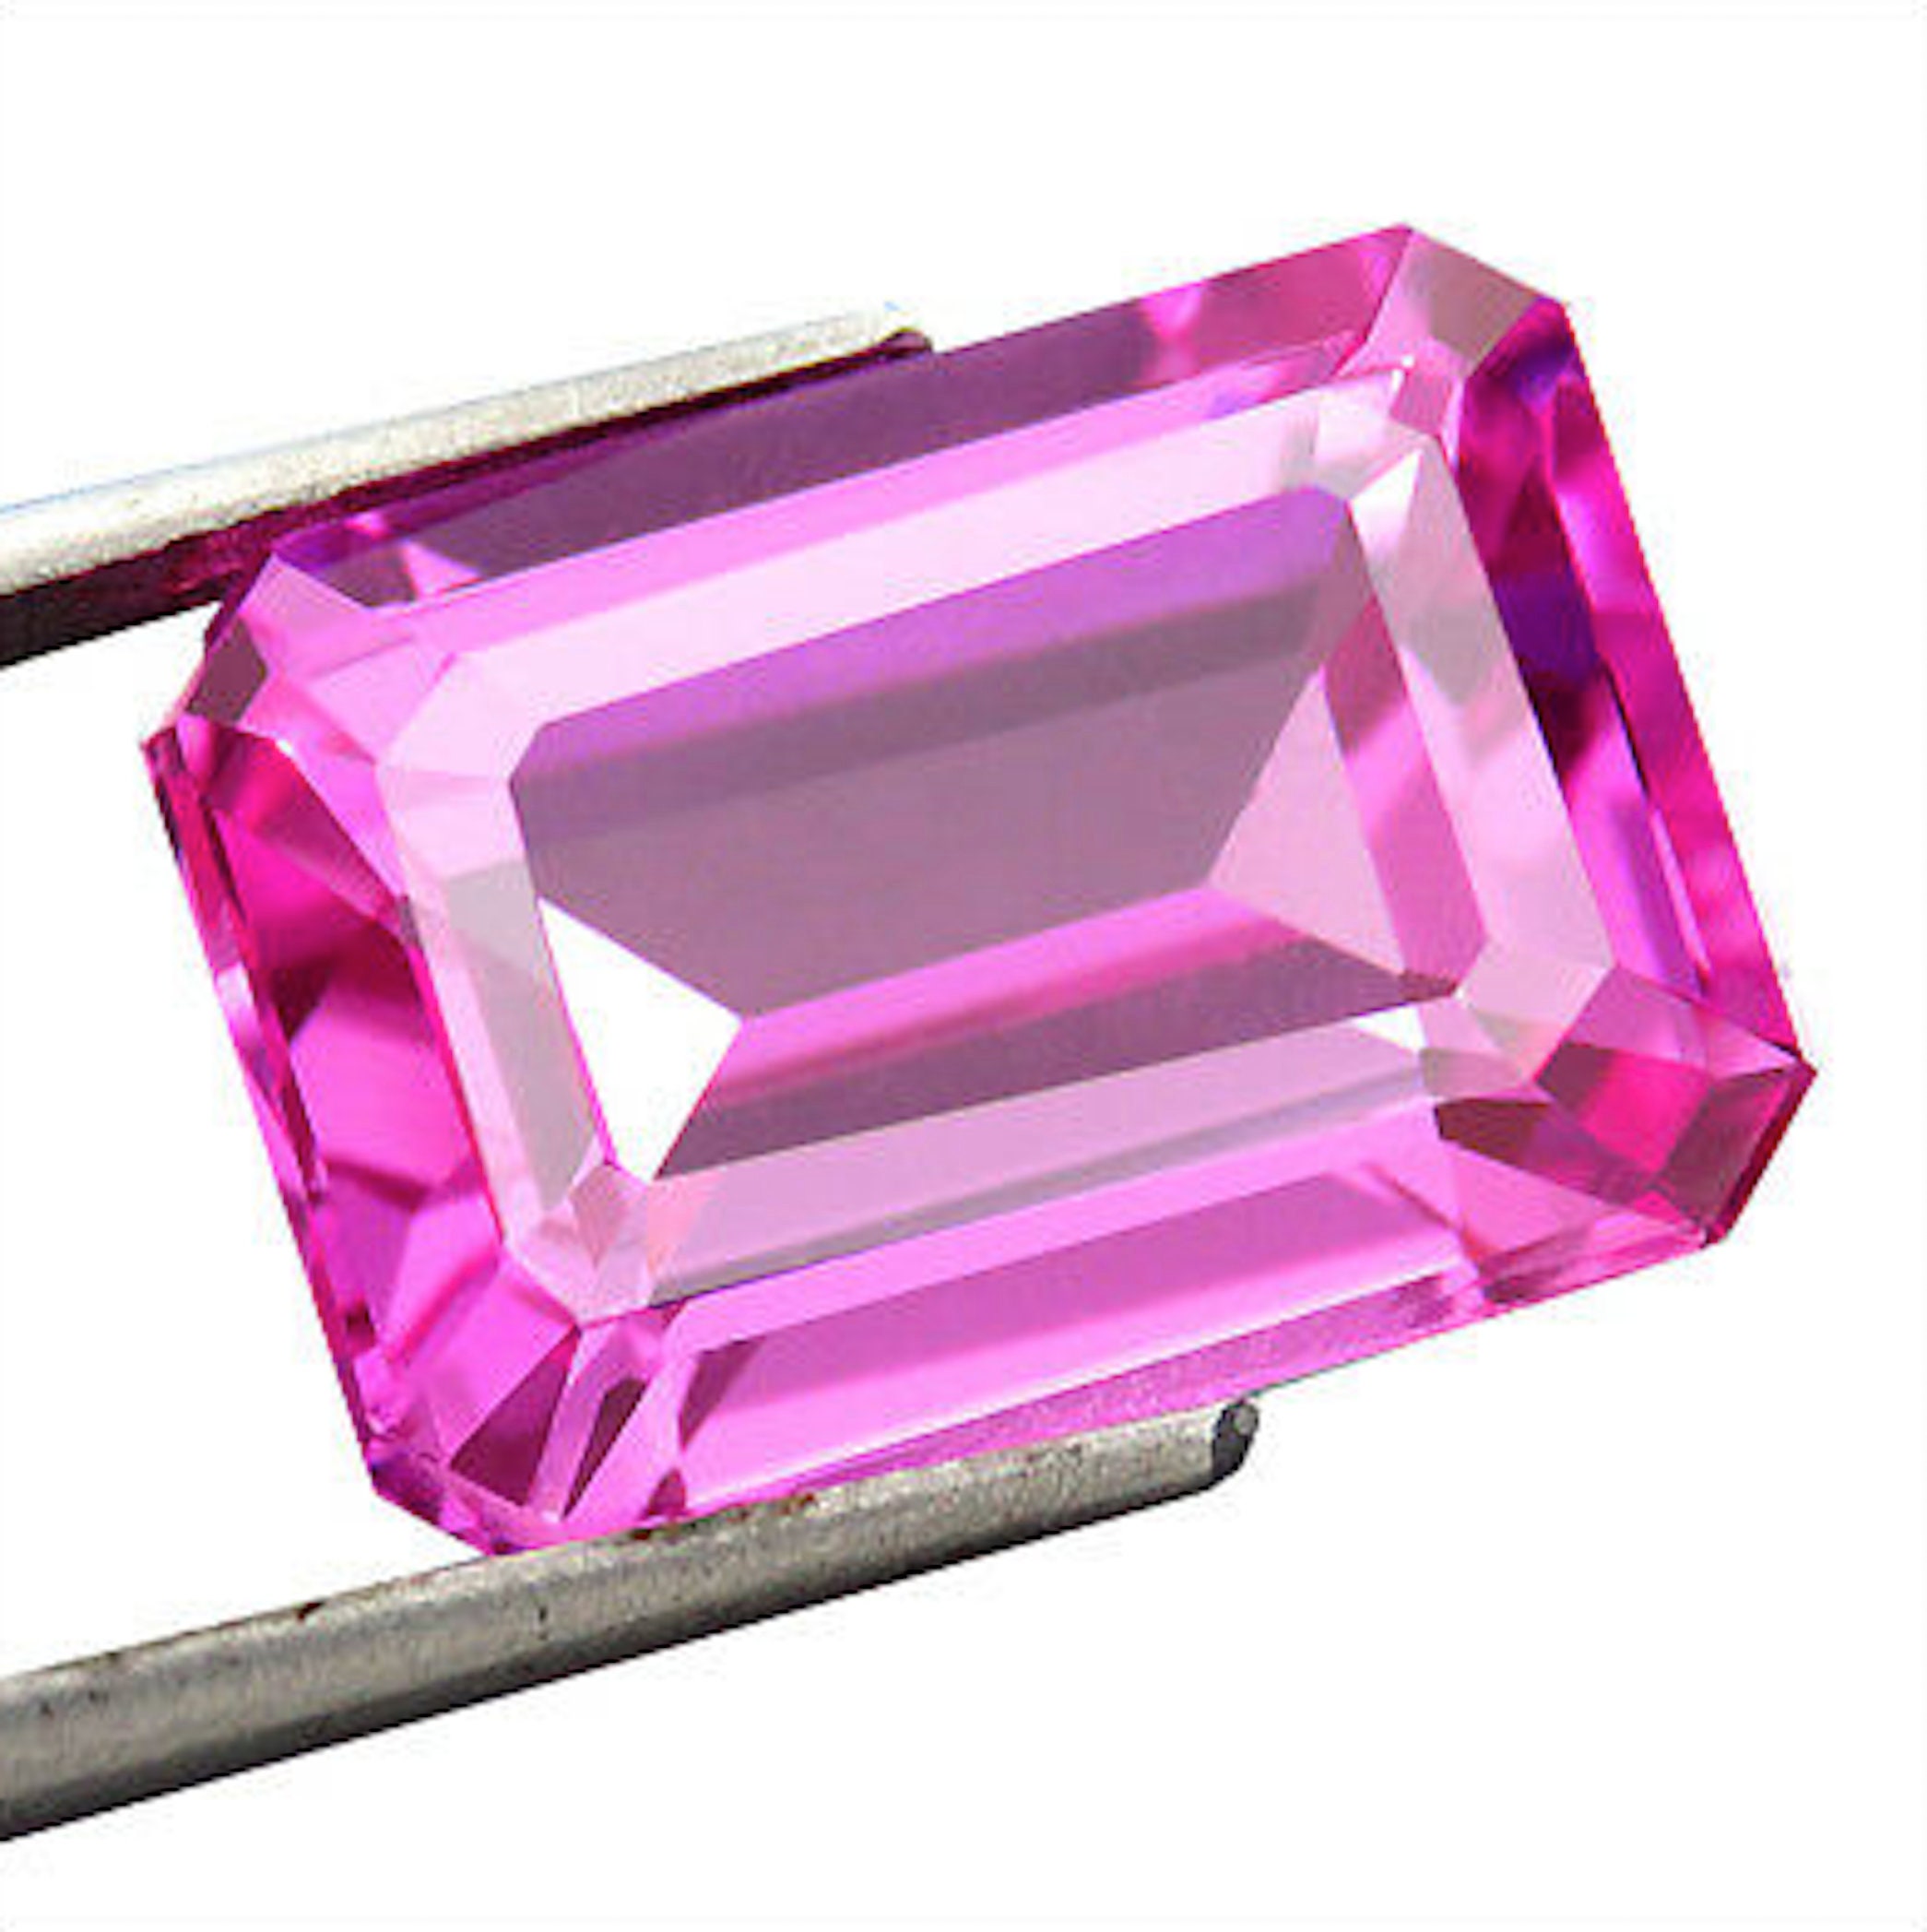 Wholesale Pink Sapphire gemstones from our gems factory